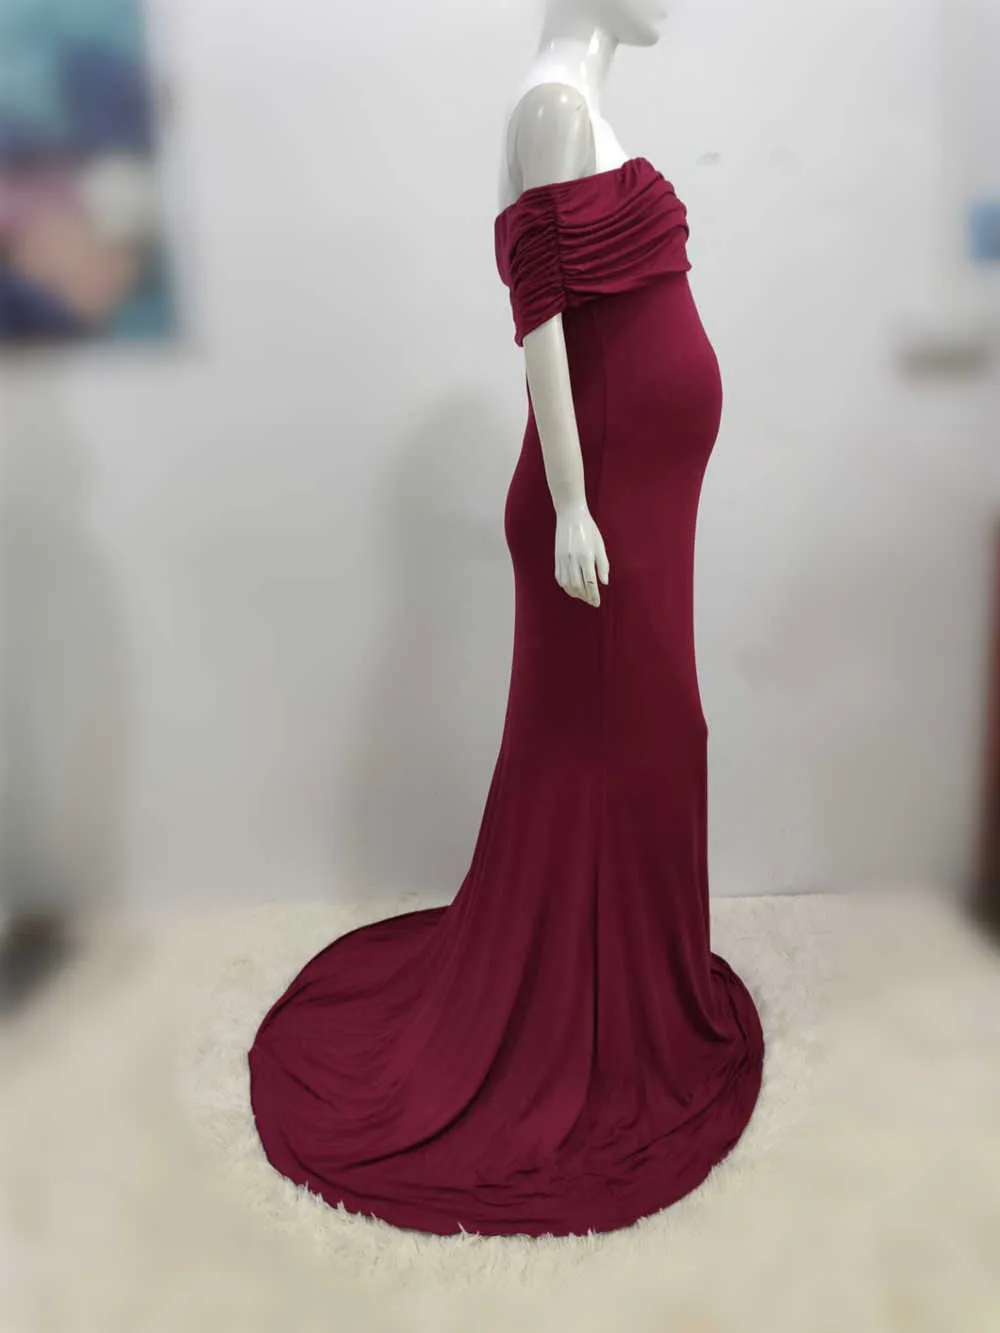 Shoulderless Maternity Dresses Photography Props Long Pregnancy Dress For Baby Shower Photo Shoots Pregnant Women Maxi Gown 2020 (2)